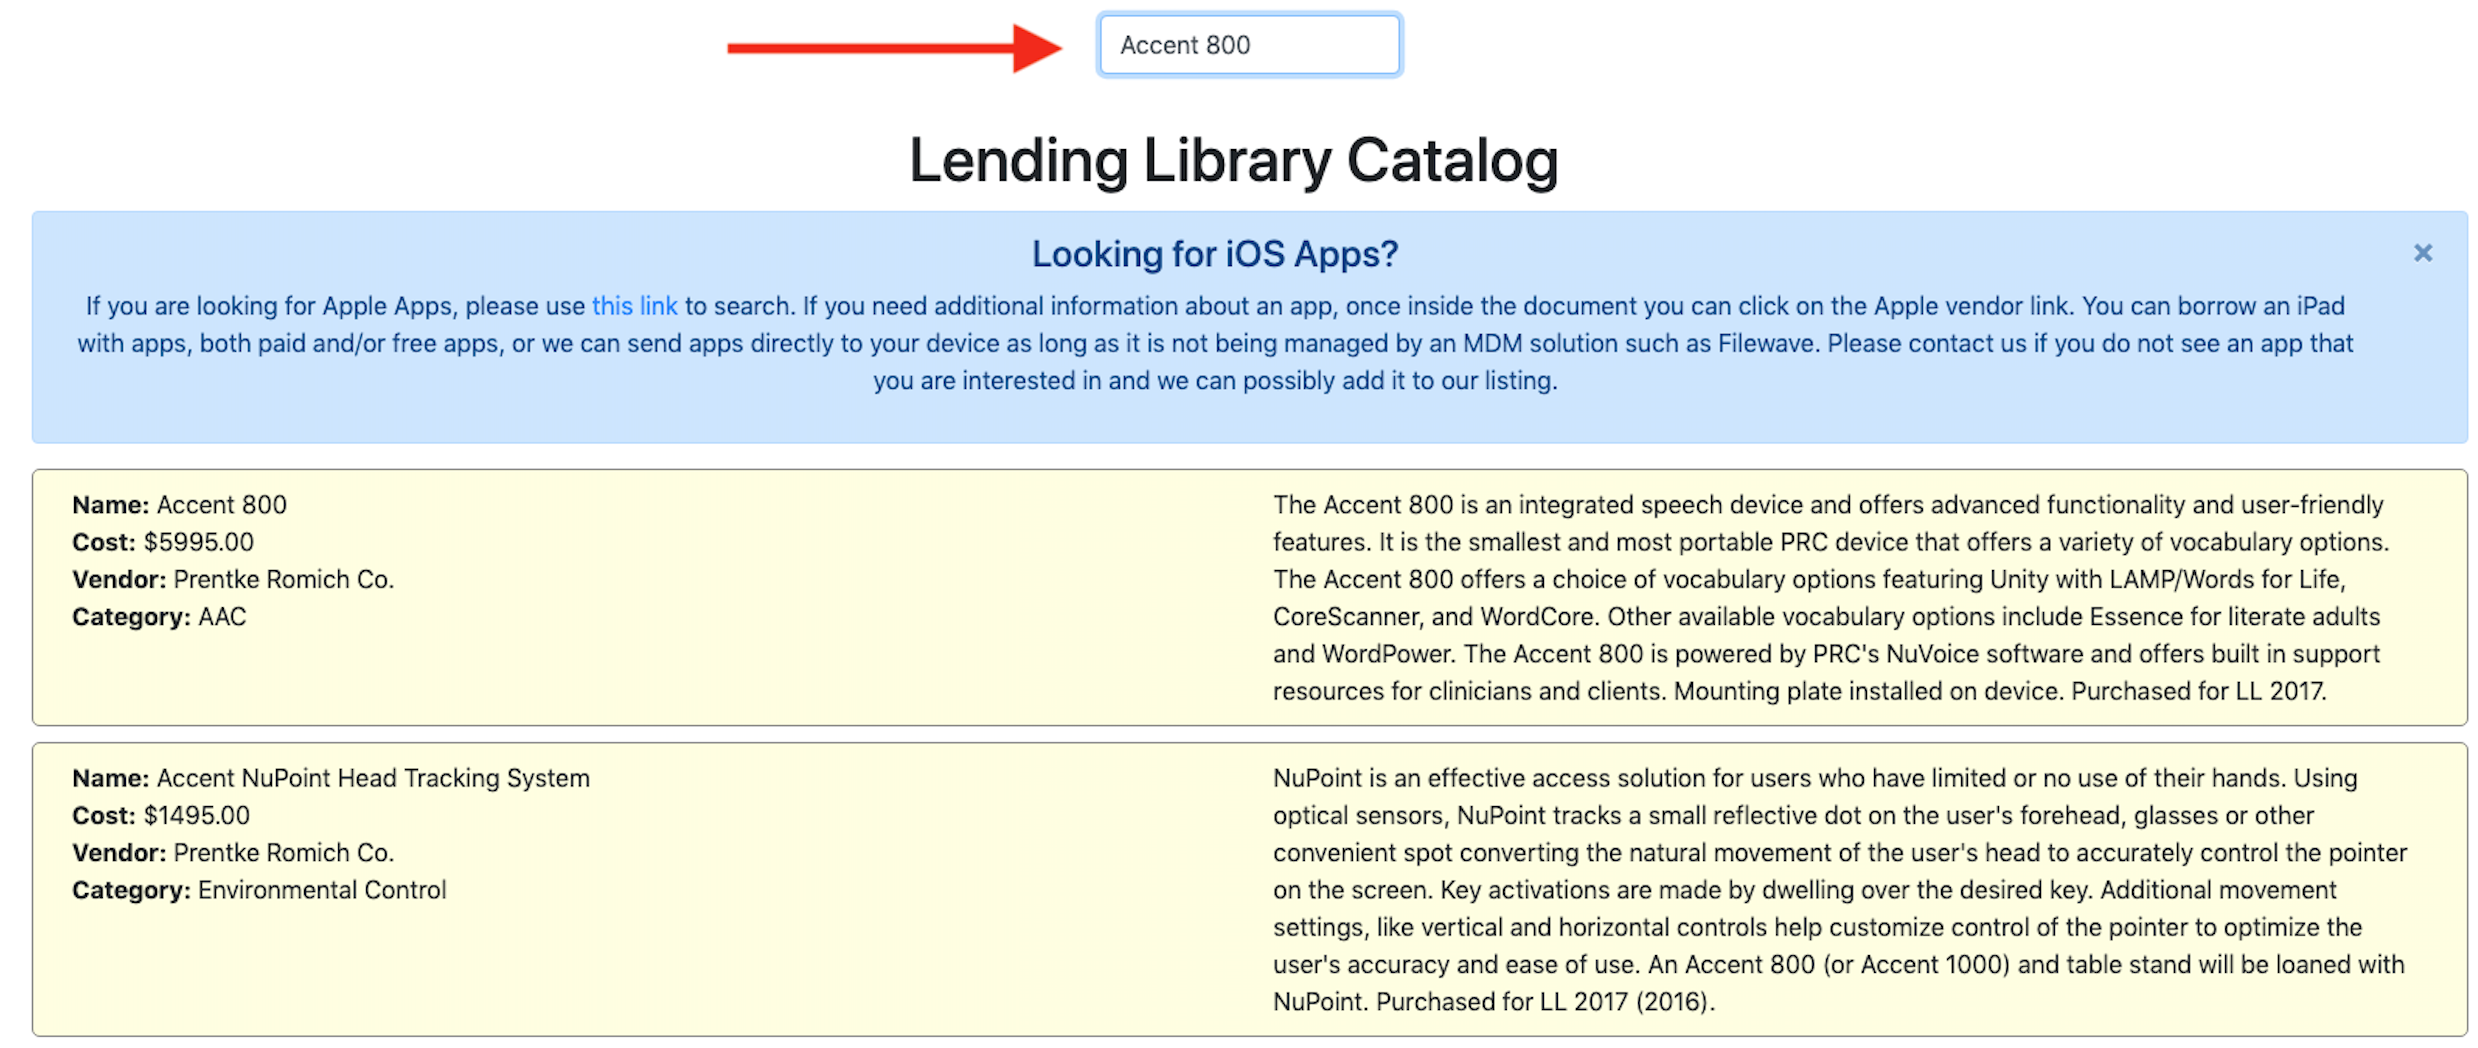 Lending Library catalog with 